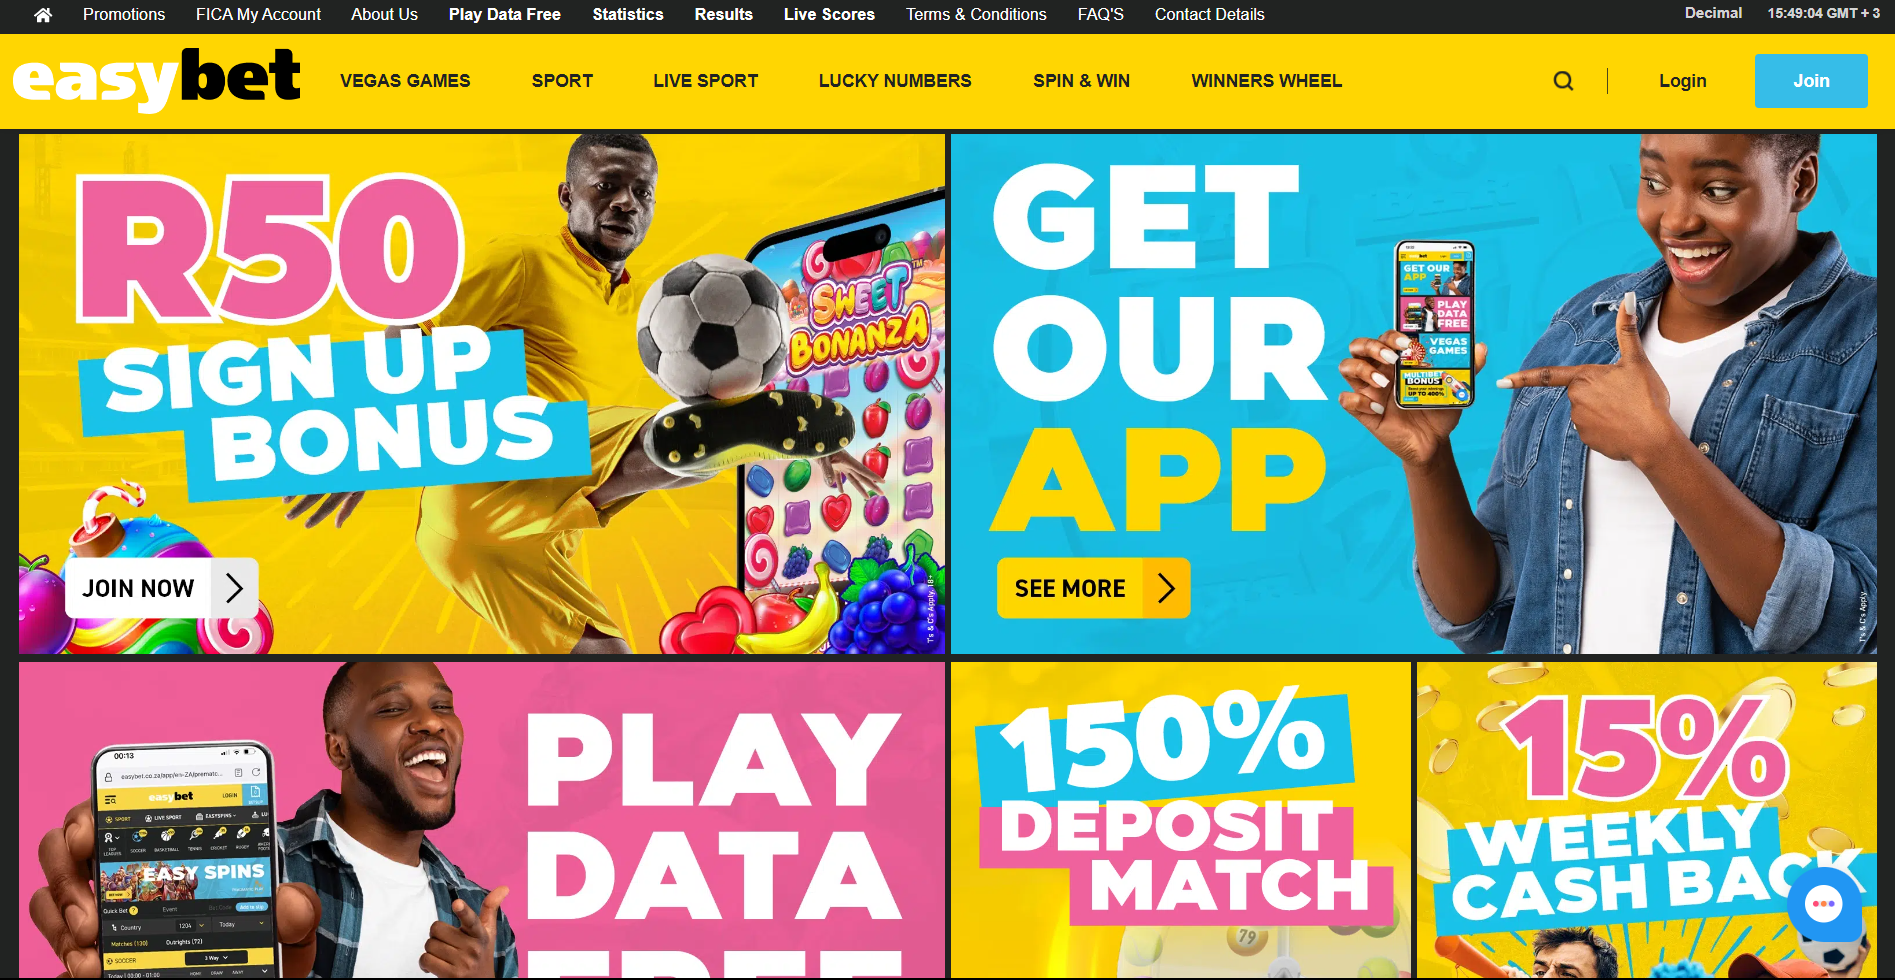 The EasyBet App main features banner